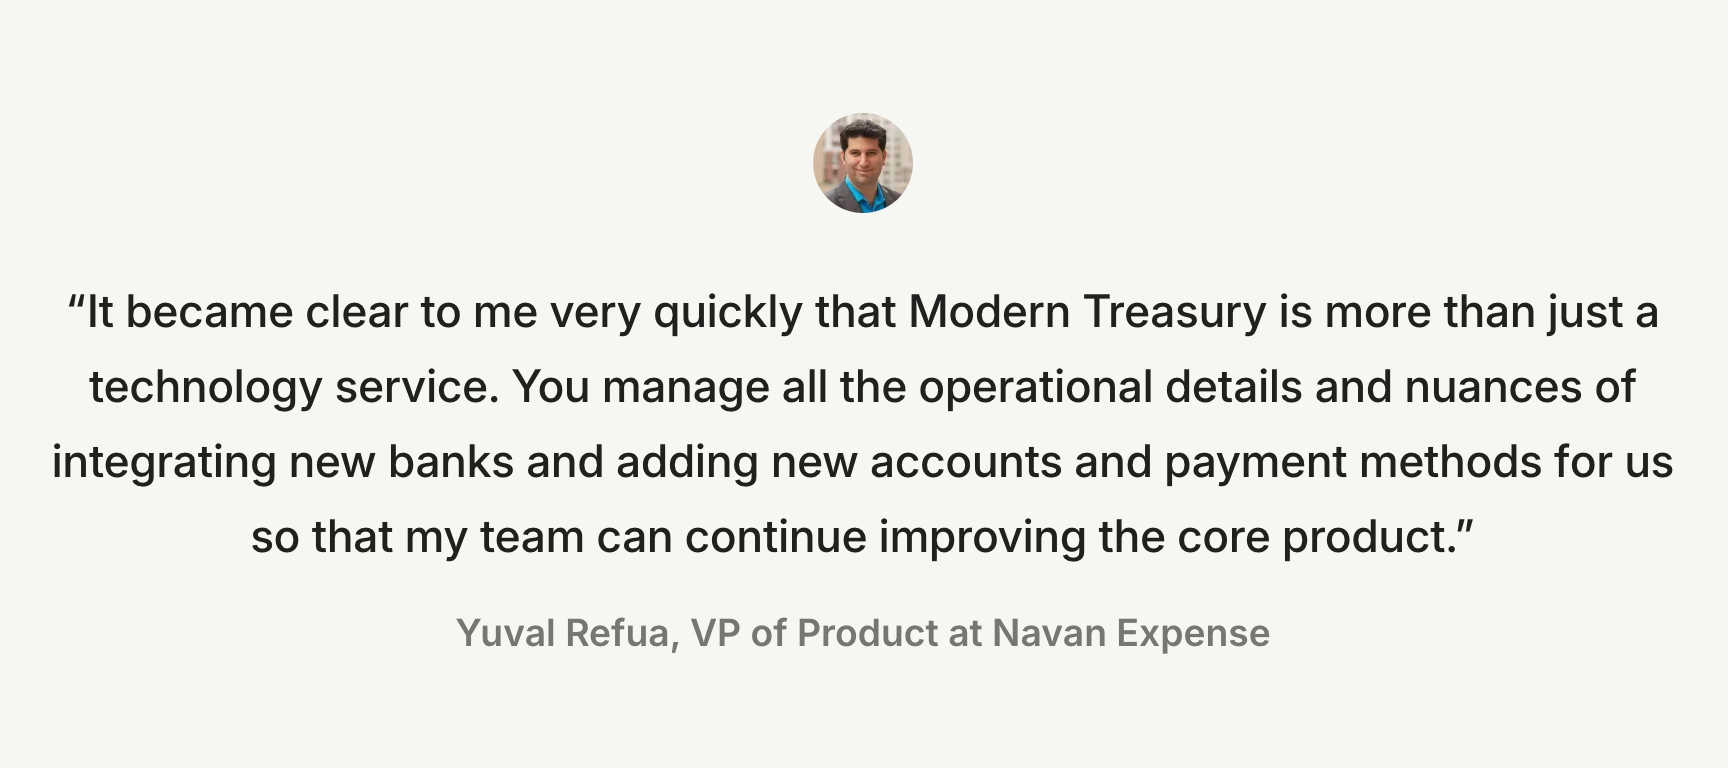 A quote from Yuval Refua, VP of Product at Navan Expense